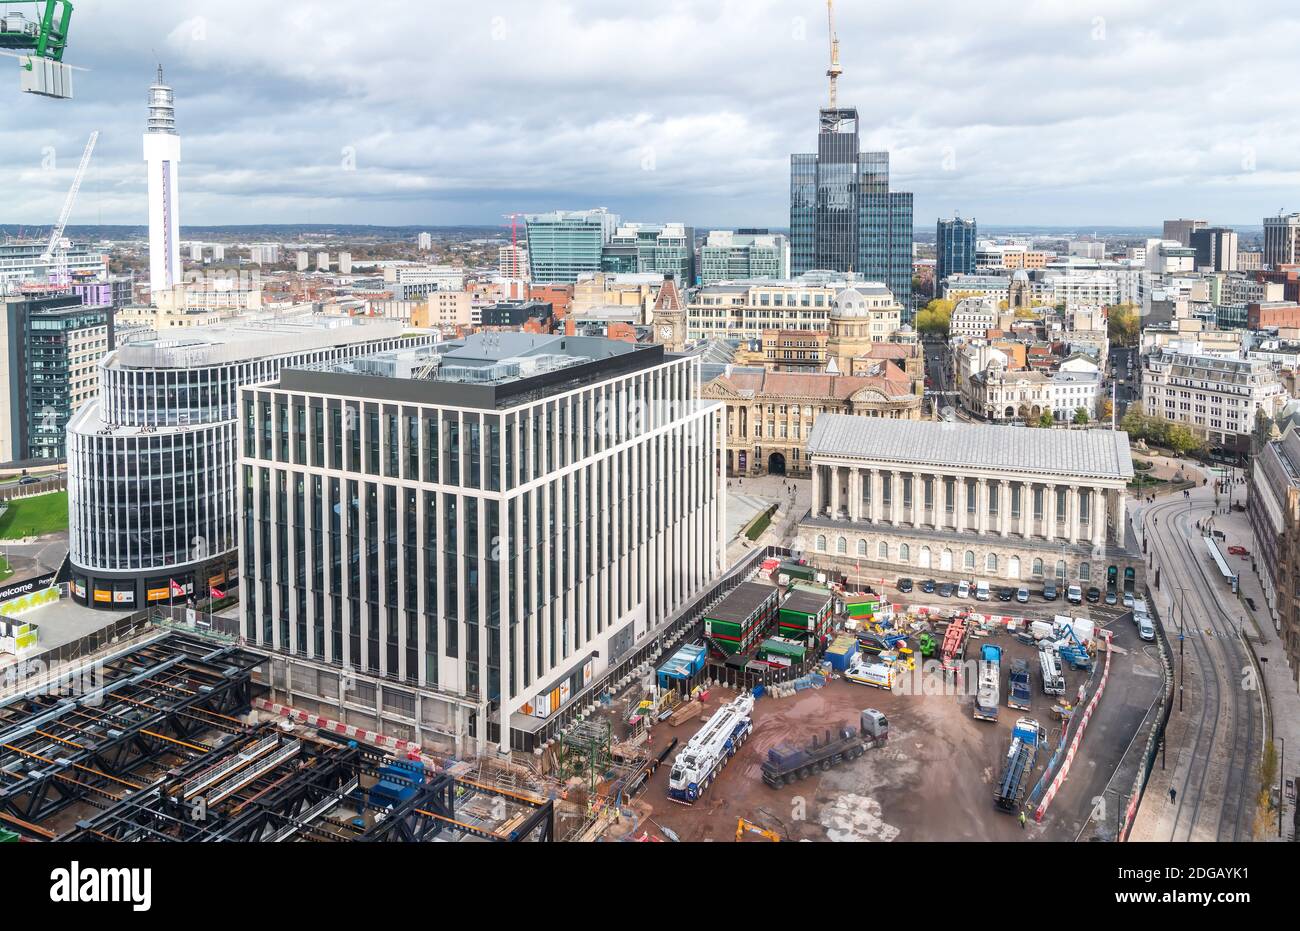 An aerial view of Birmingham City centre overlooking the construction site at the Paradise development, also visible is the Town Hall. Stock Photo